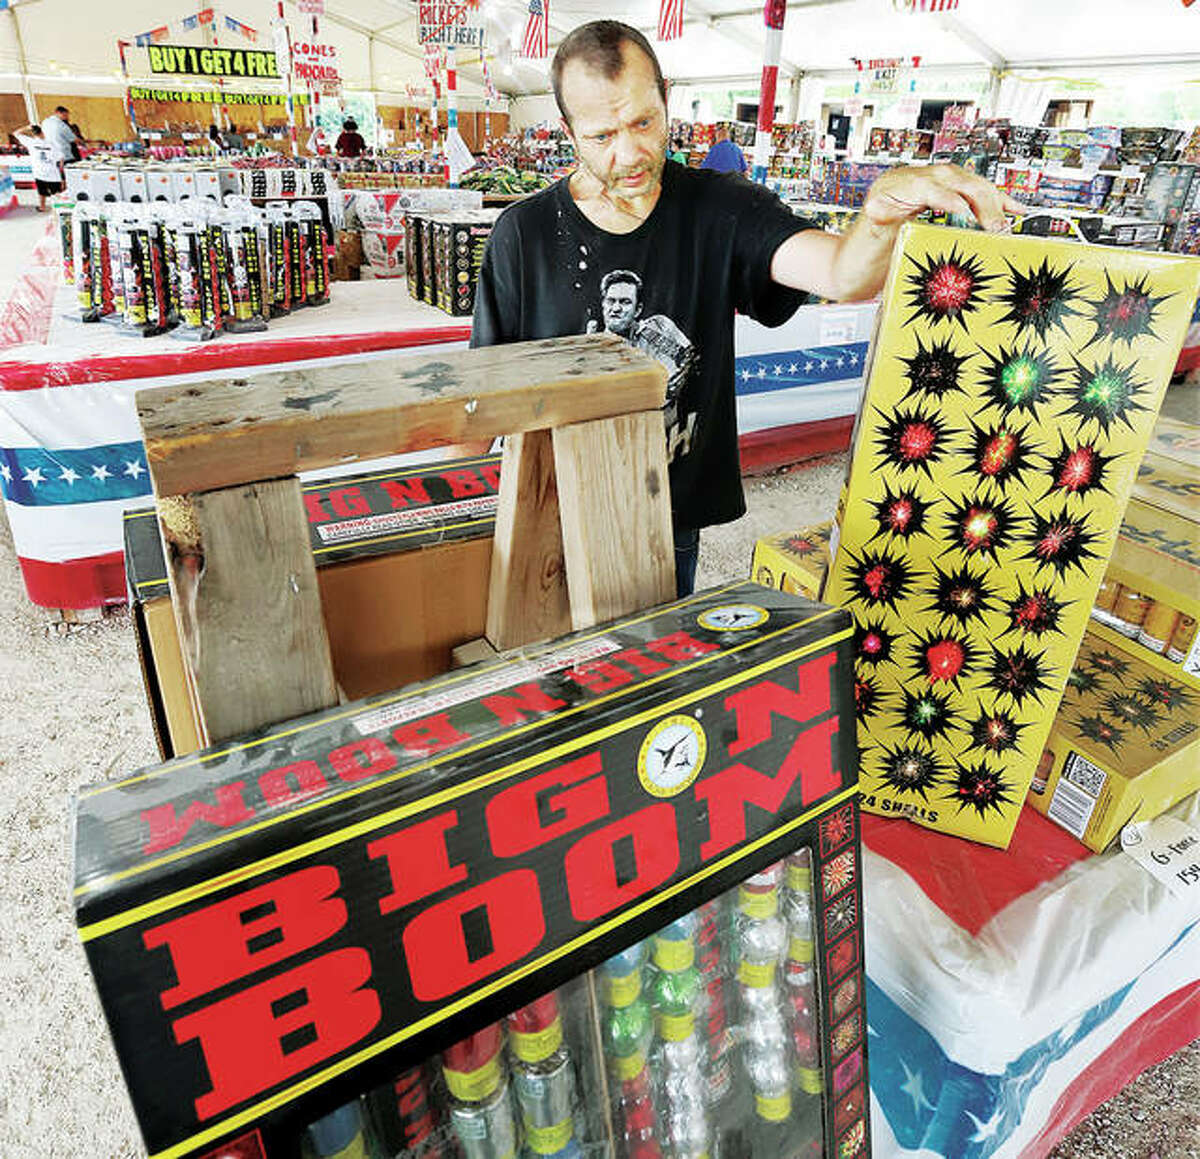 Jason Williams of Kampsville ponders the many fireworks choices Tuesday in the large fireworks tent in West Alton, Missouri where sales were steady.